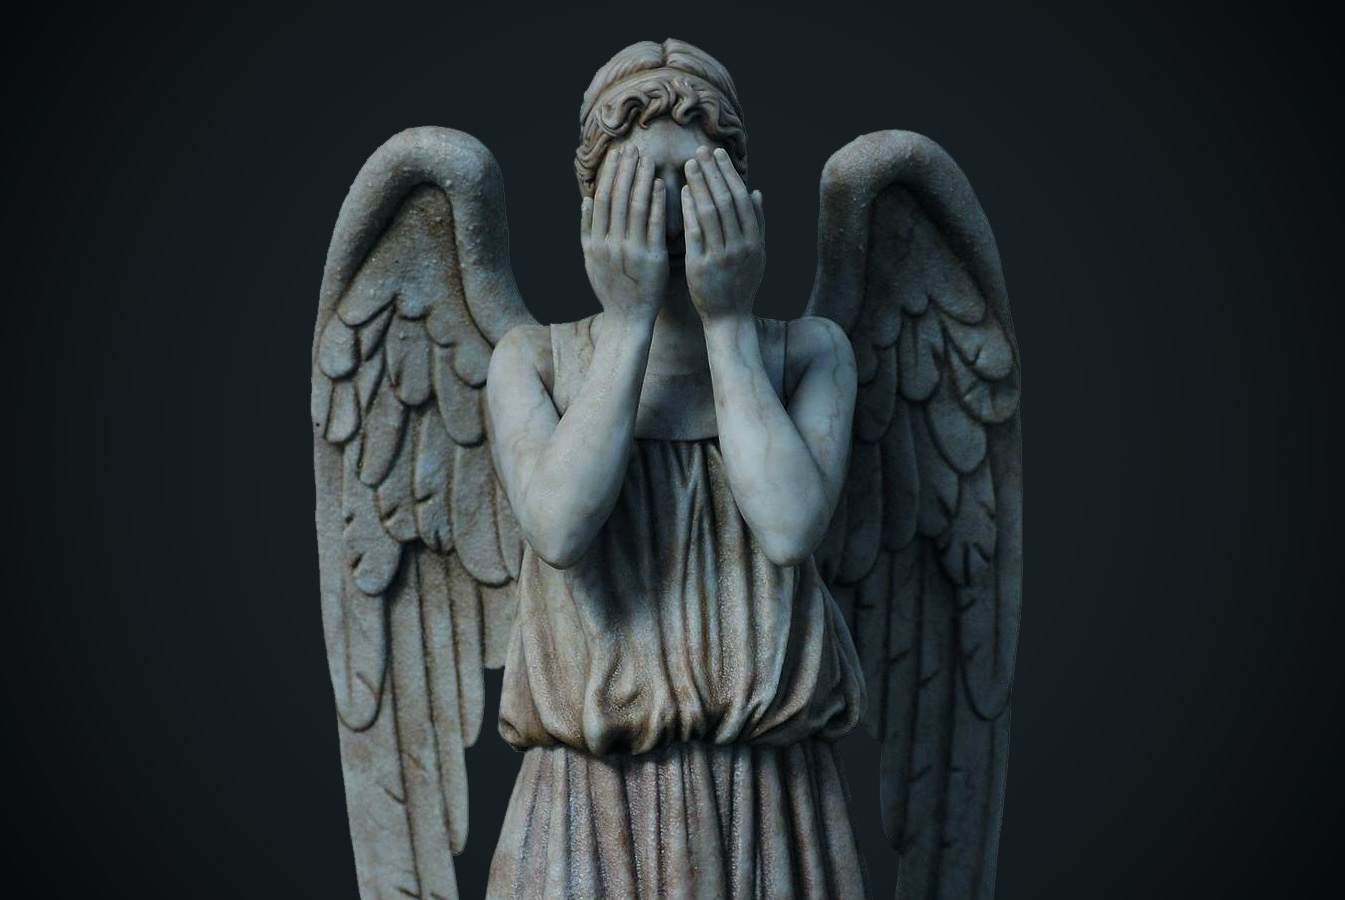 Studios Doctor Who Weeping Angel Scale Figurine Is On Its Way